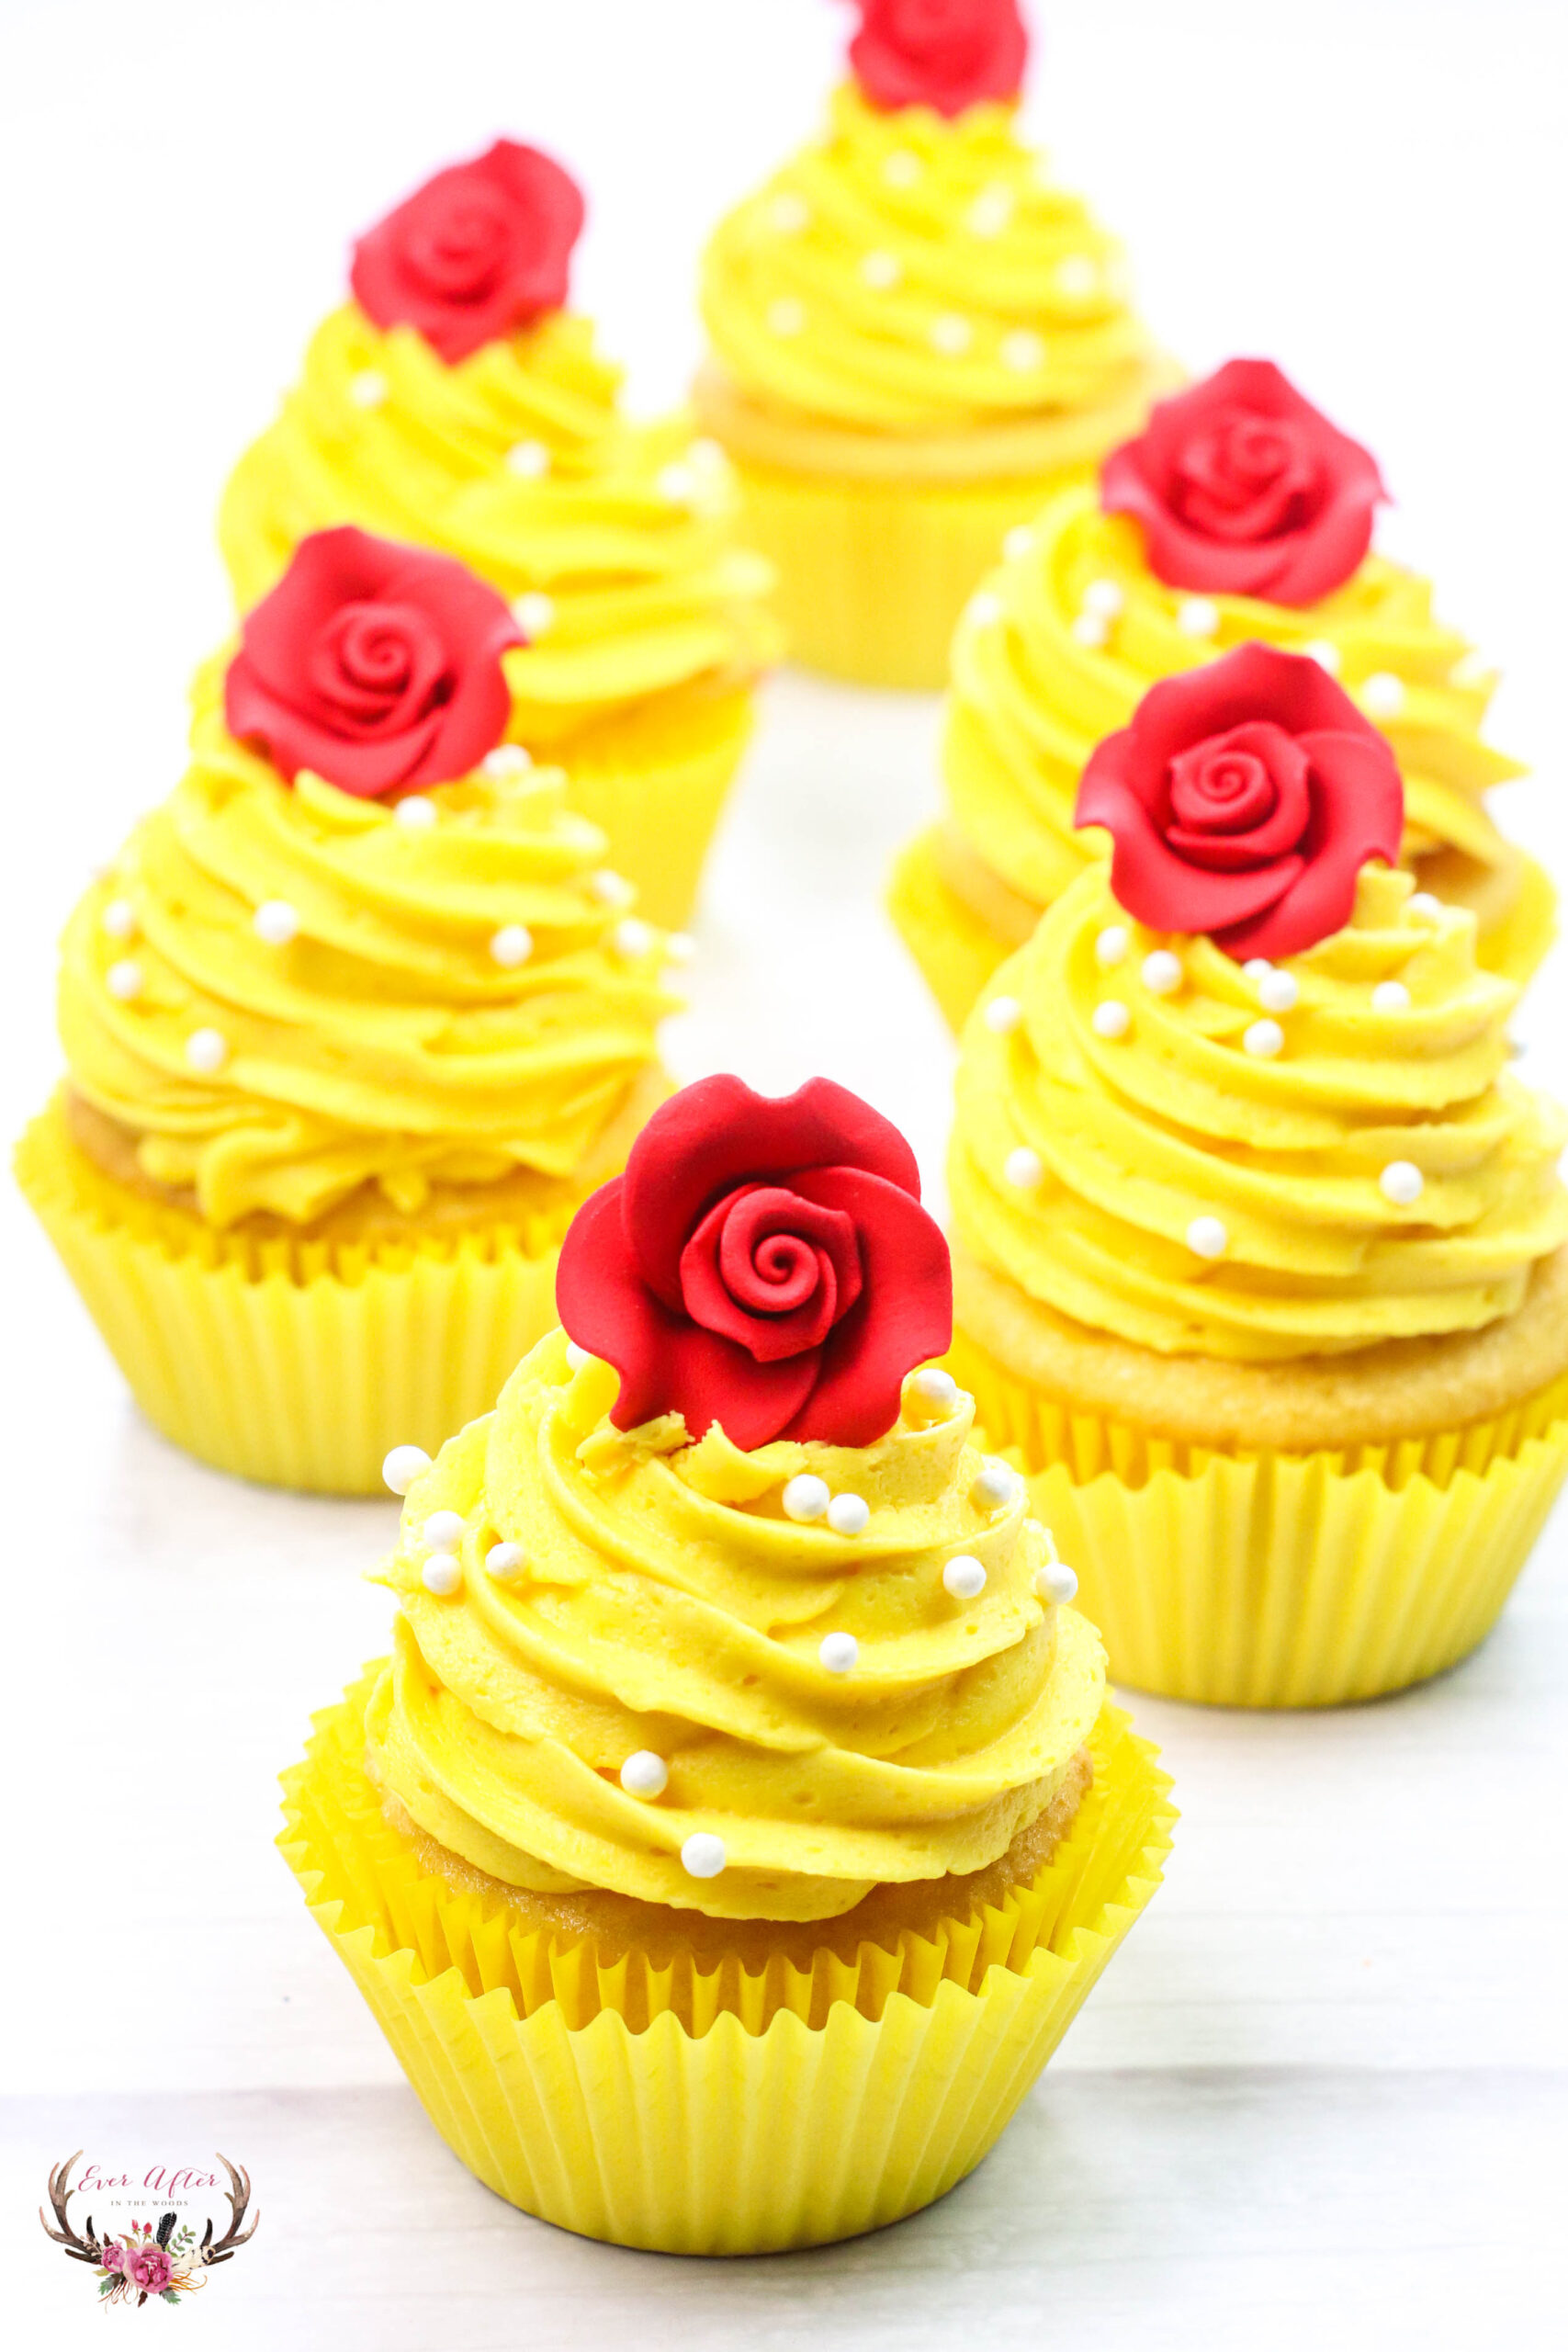 Beauty and the Beast Cupcakes